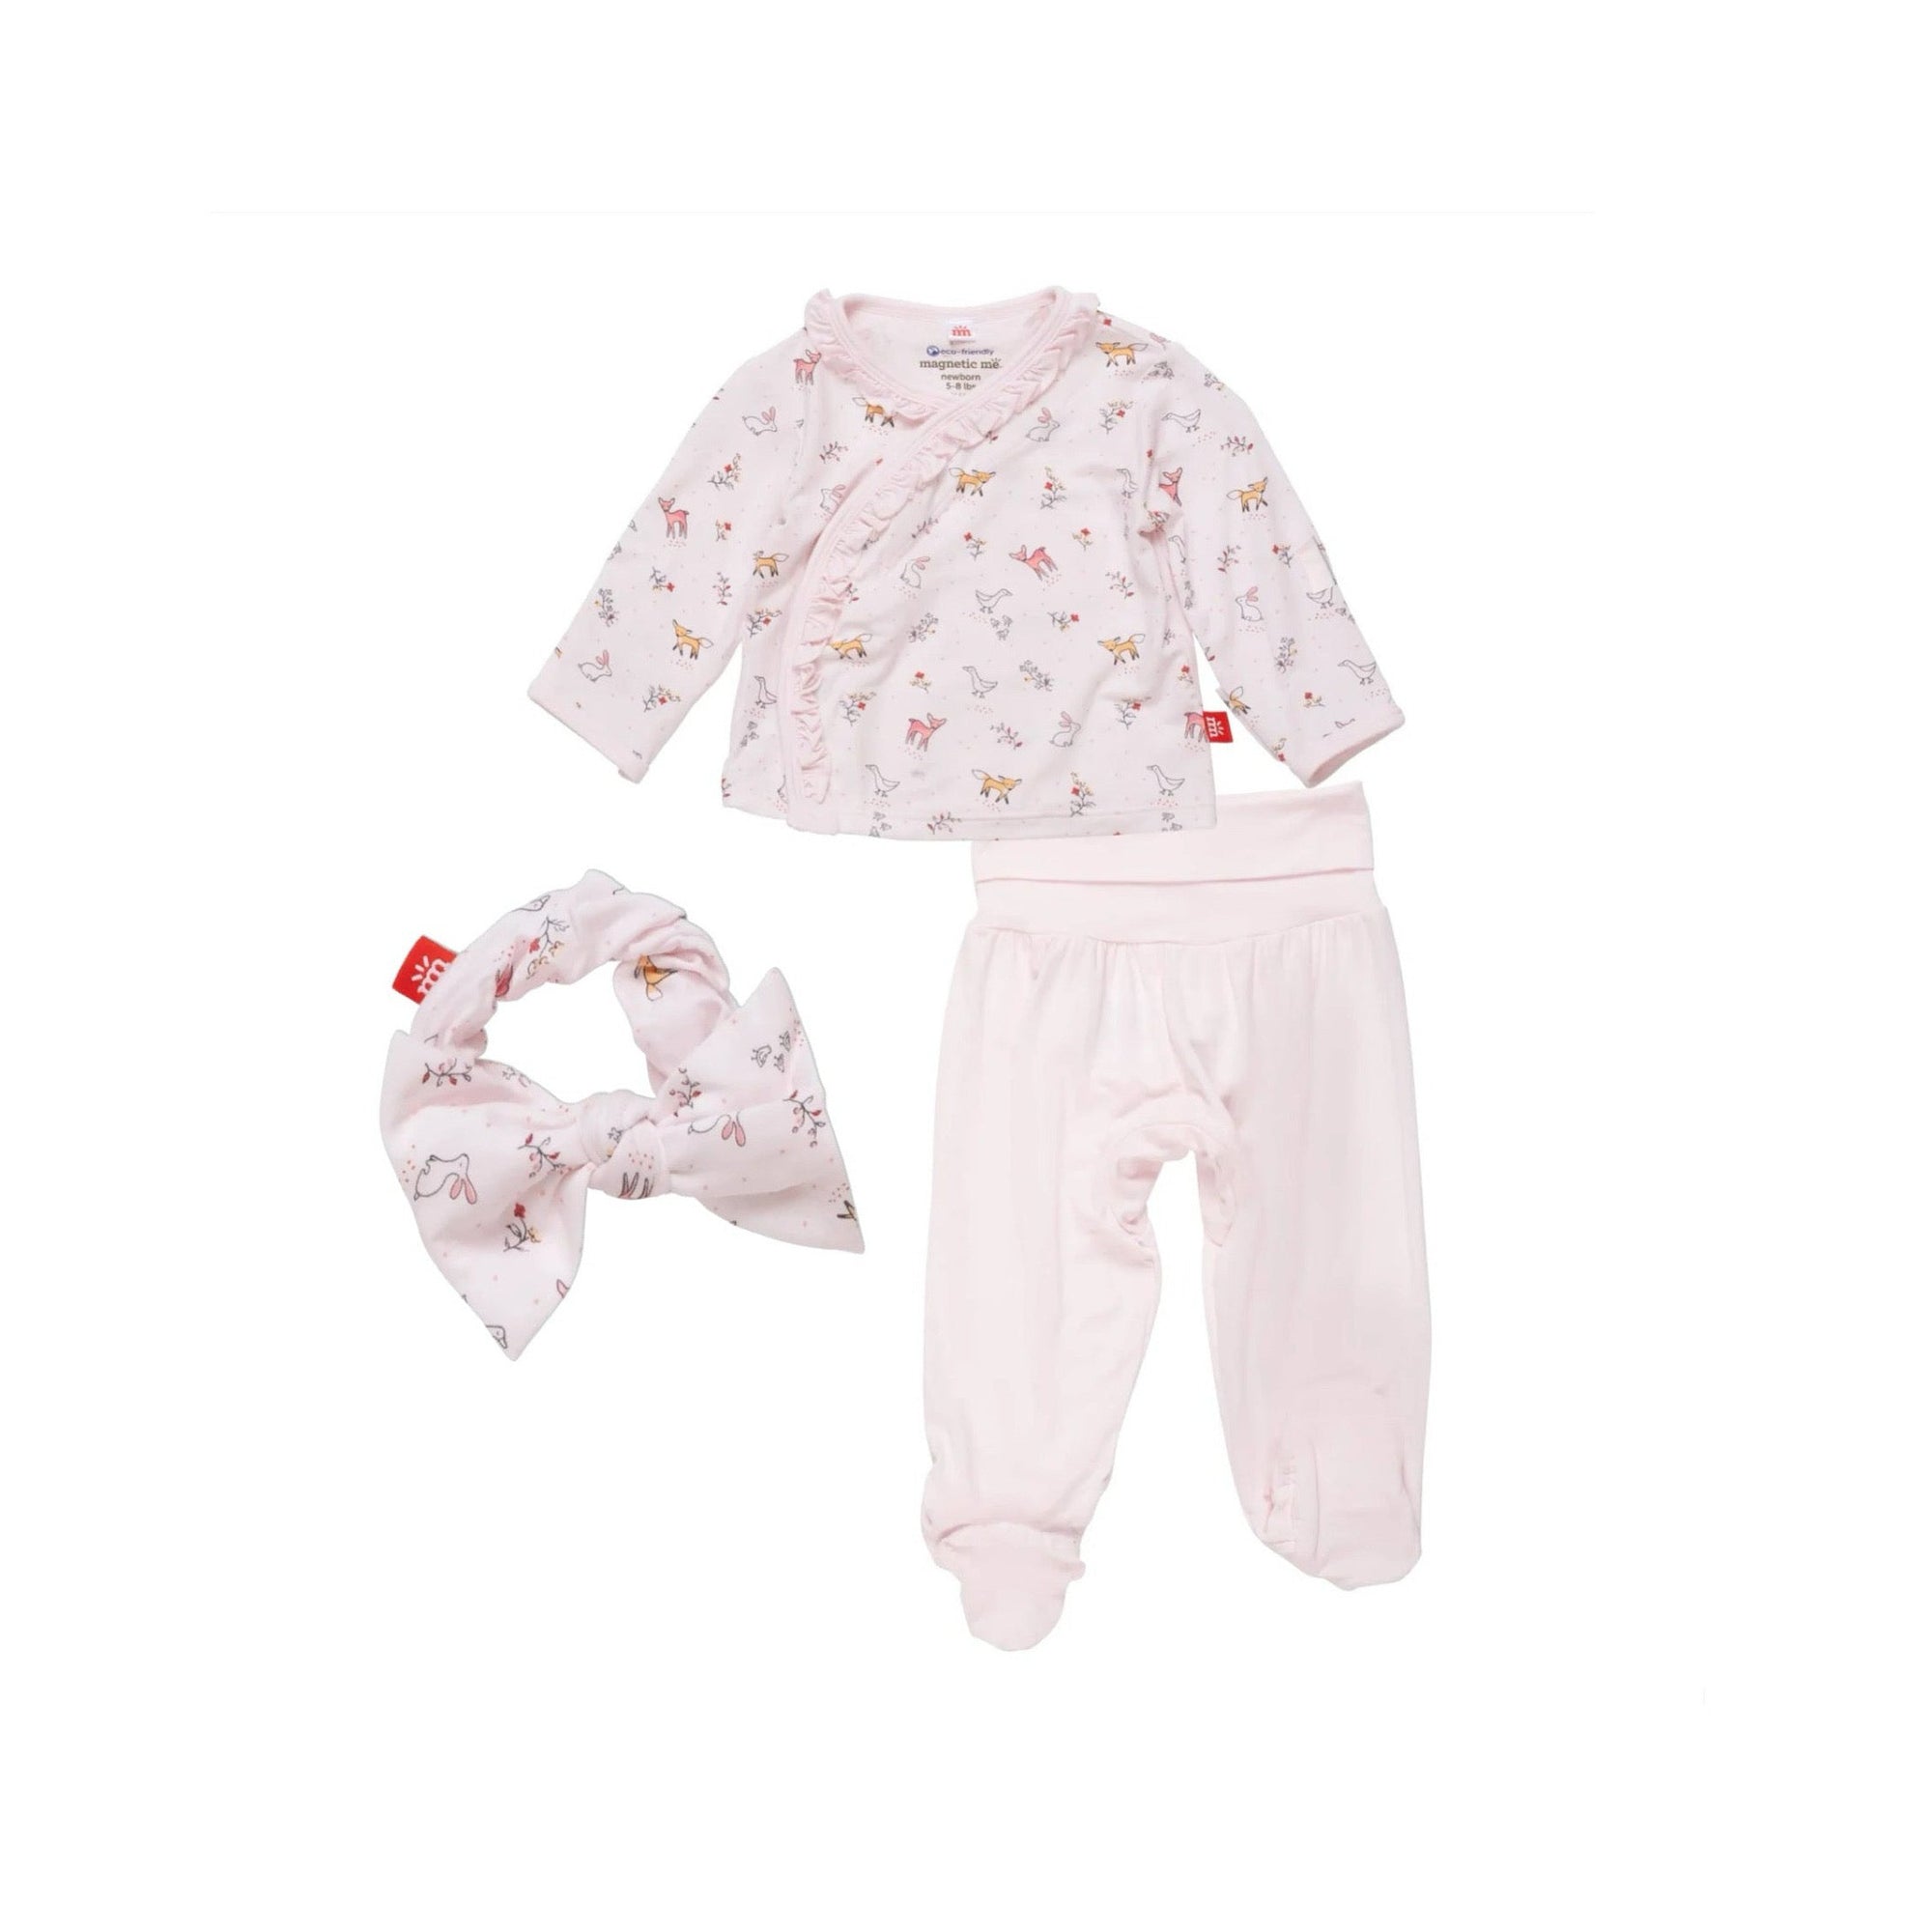 Woodsy Tales 3-Piece Baby Girl Take-Me-Home Set